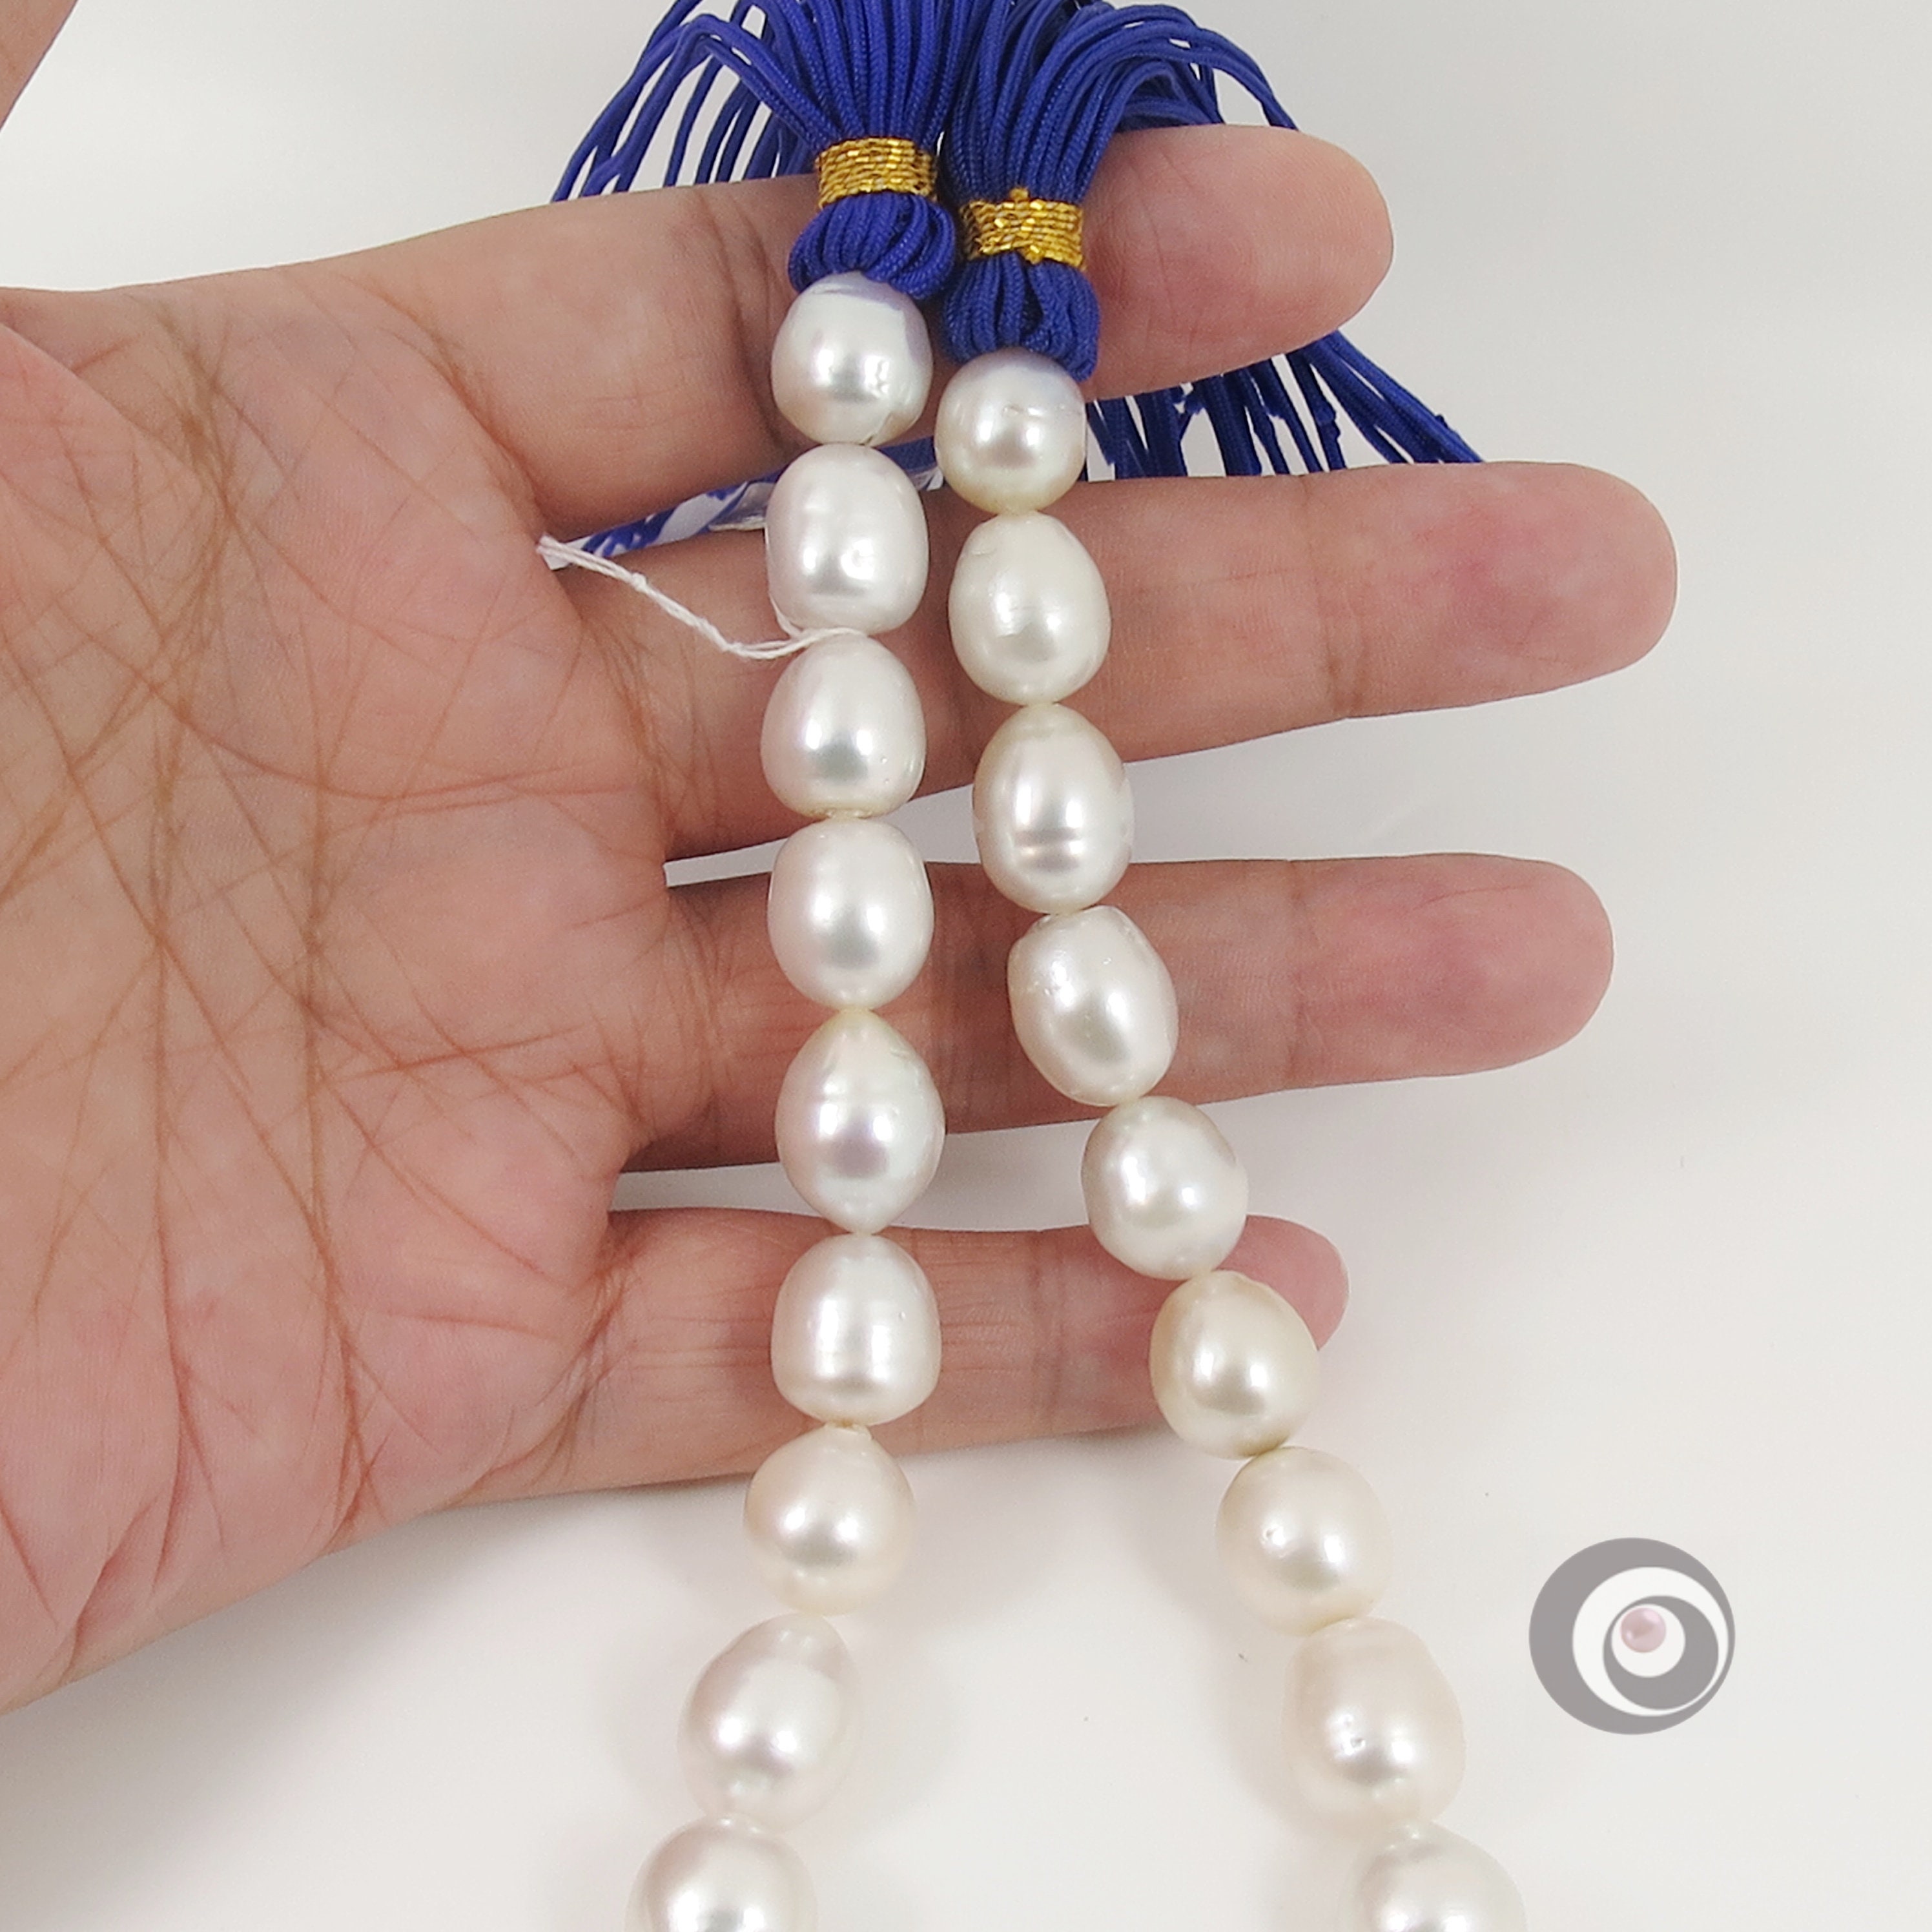 Genuine White South Sea Pearl Strand / Natural Color Seawater Pearl Necklace  / 11 14mm Pearls / Choose Your Clasp F731 